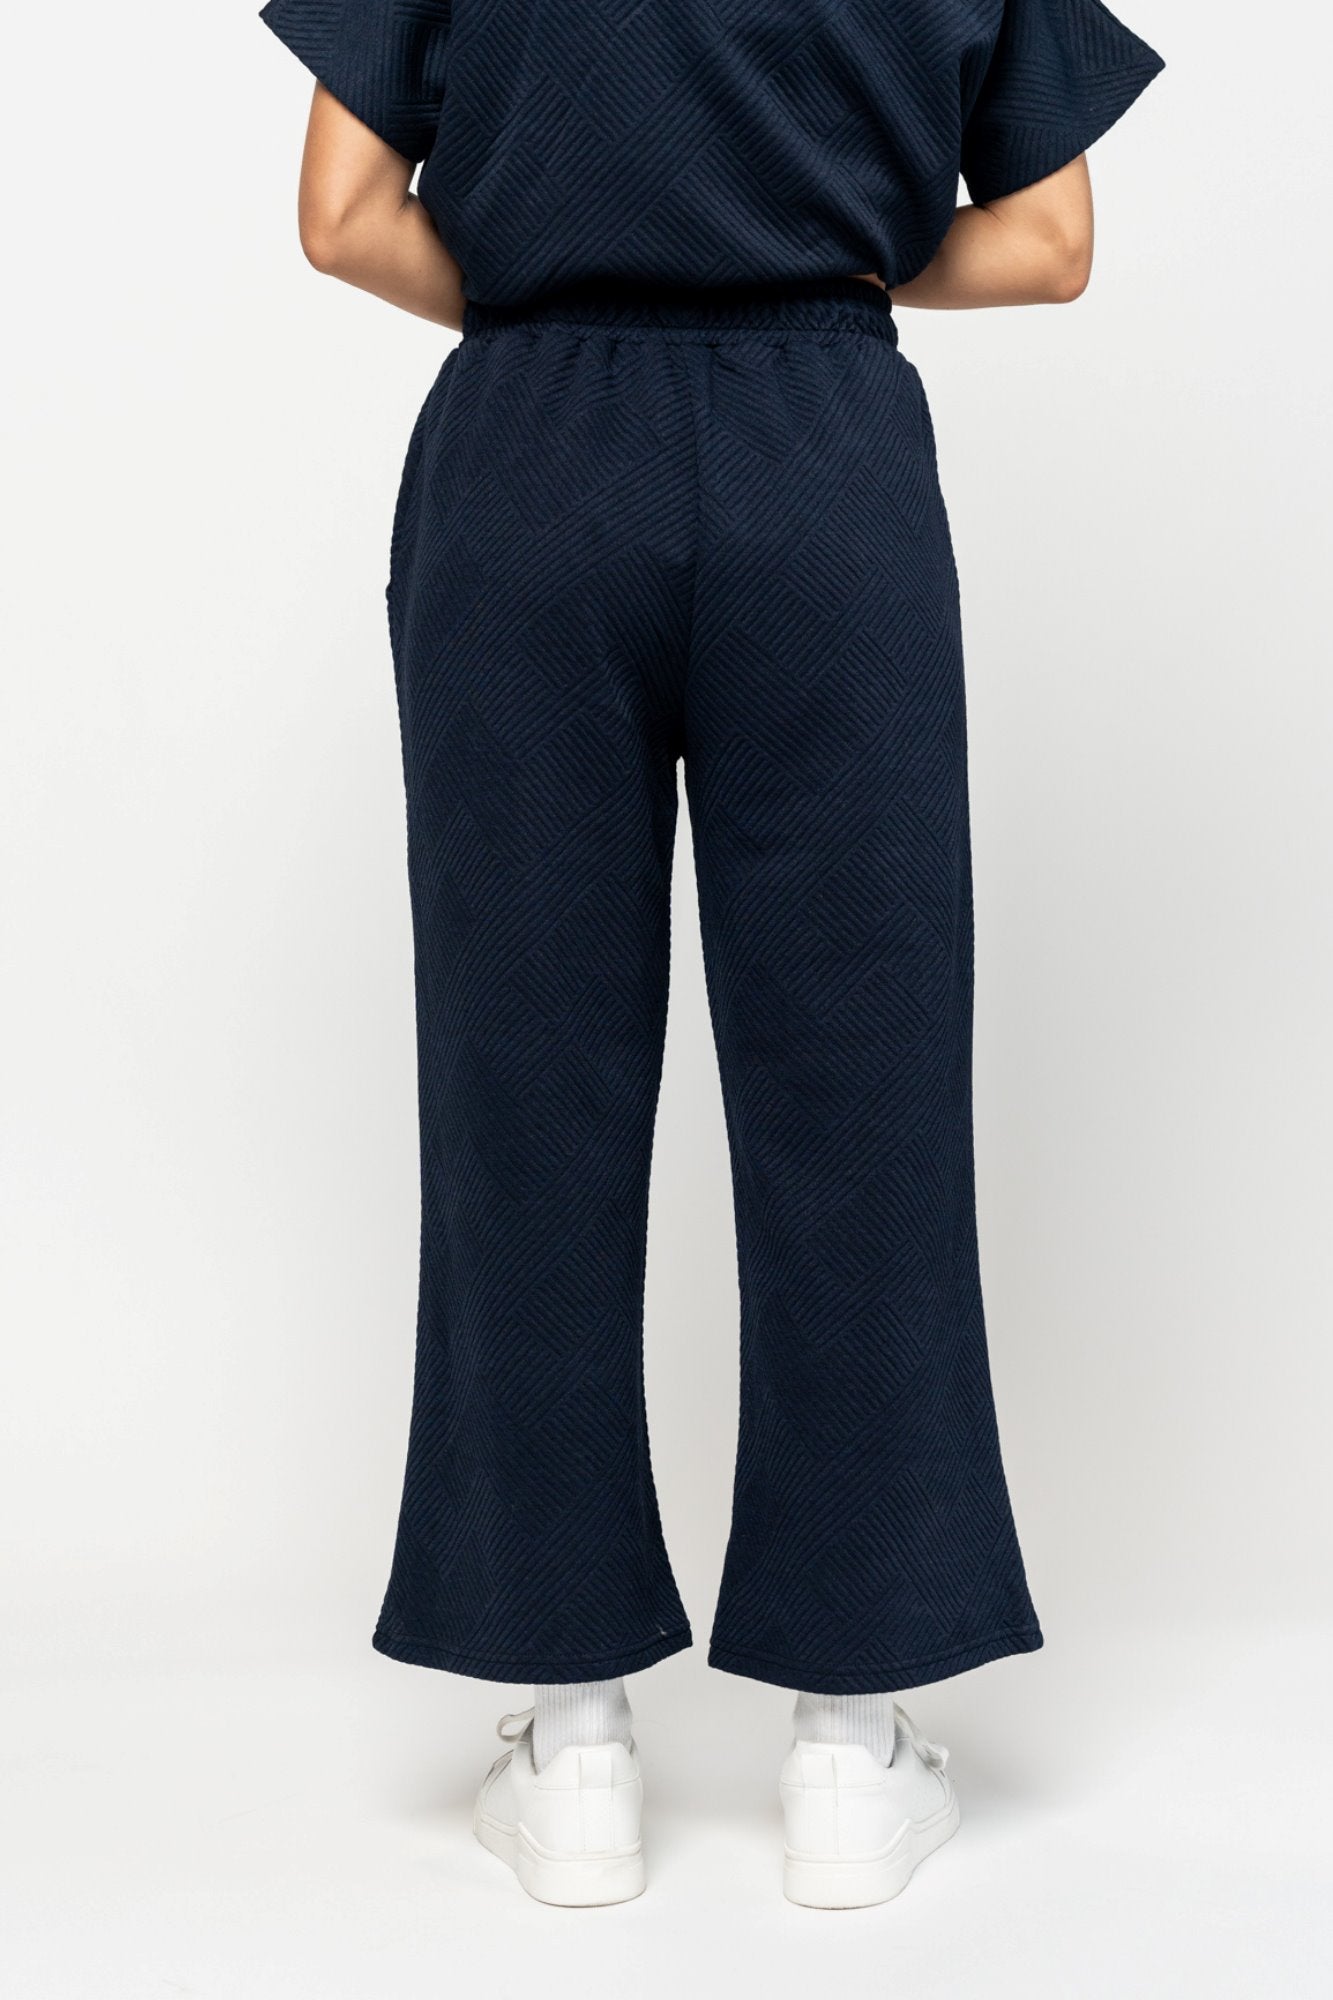 Addison Pants in Navy Holley Girl 